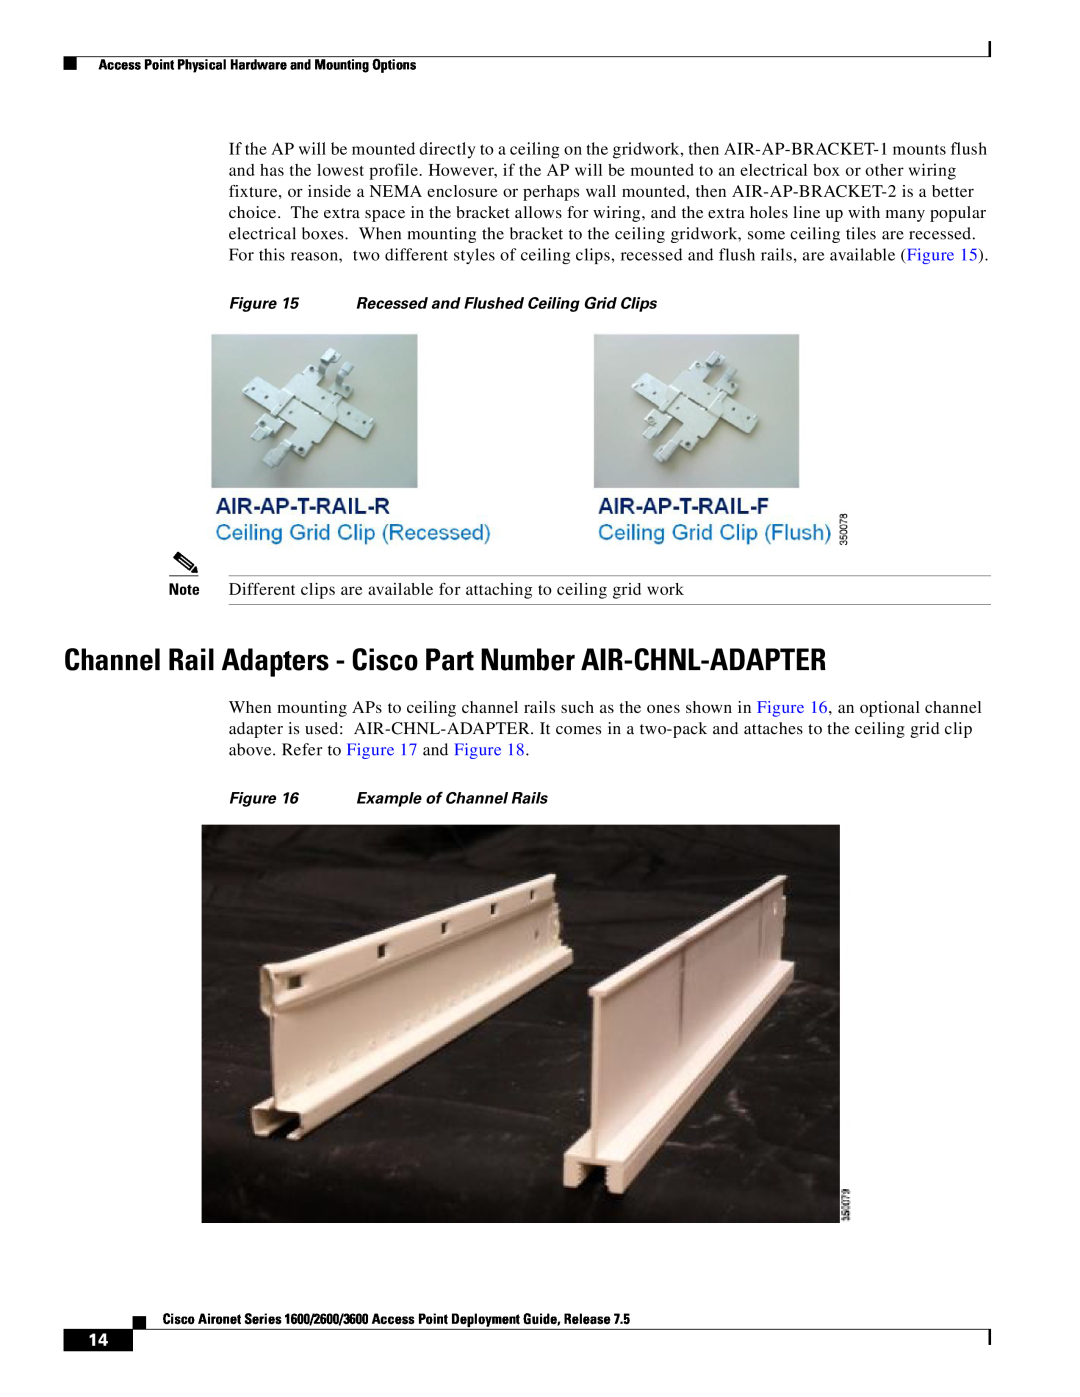 Cisco Systems AIRRM3000ACAK9 manual Channel Rail Adapters - Cisco Part Number AIR-CHNL-ADAPTER 